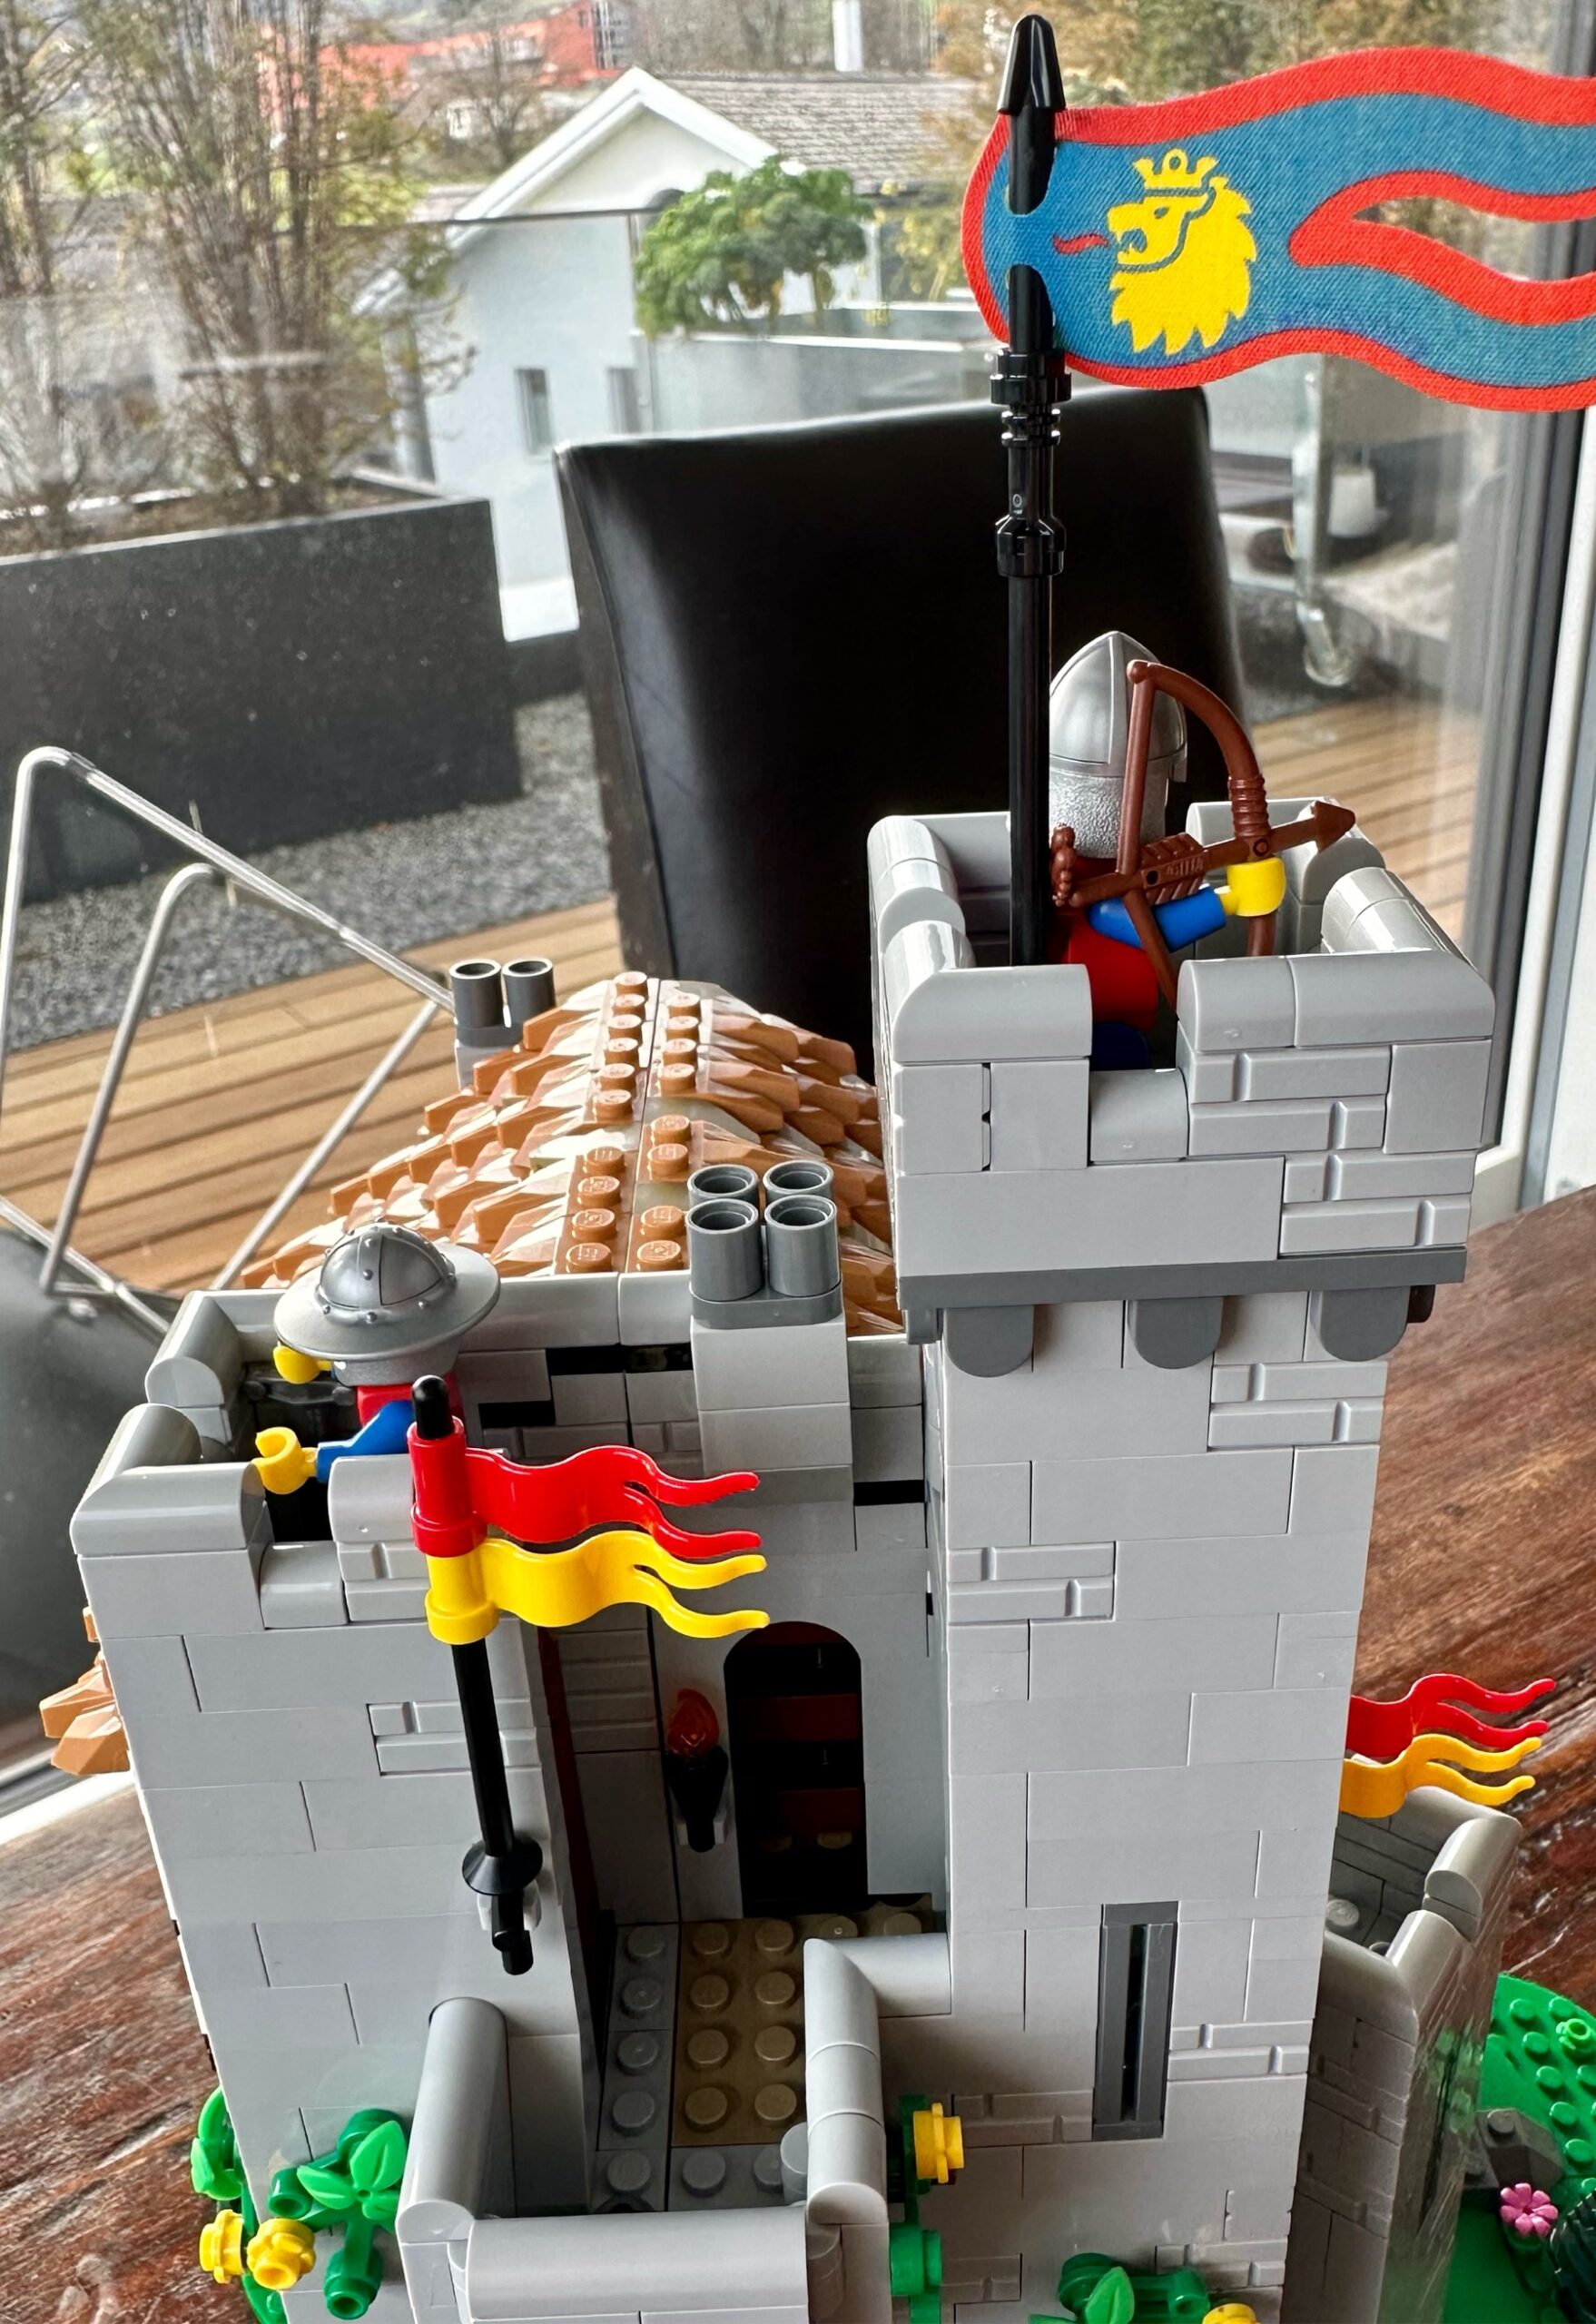 LEGO castle with two stone towers each with a guard atop it and a flying pennant.